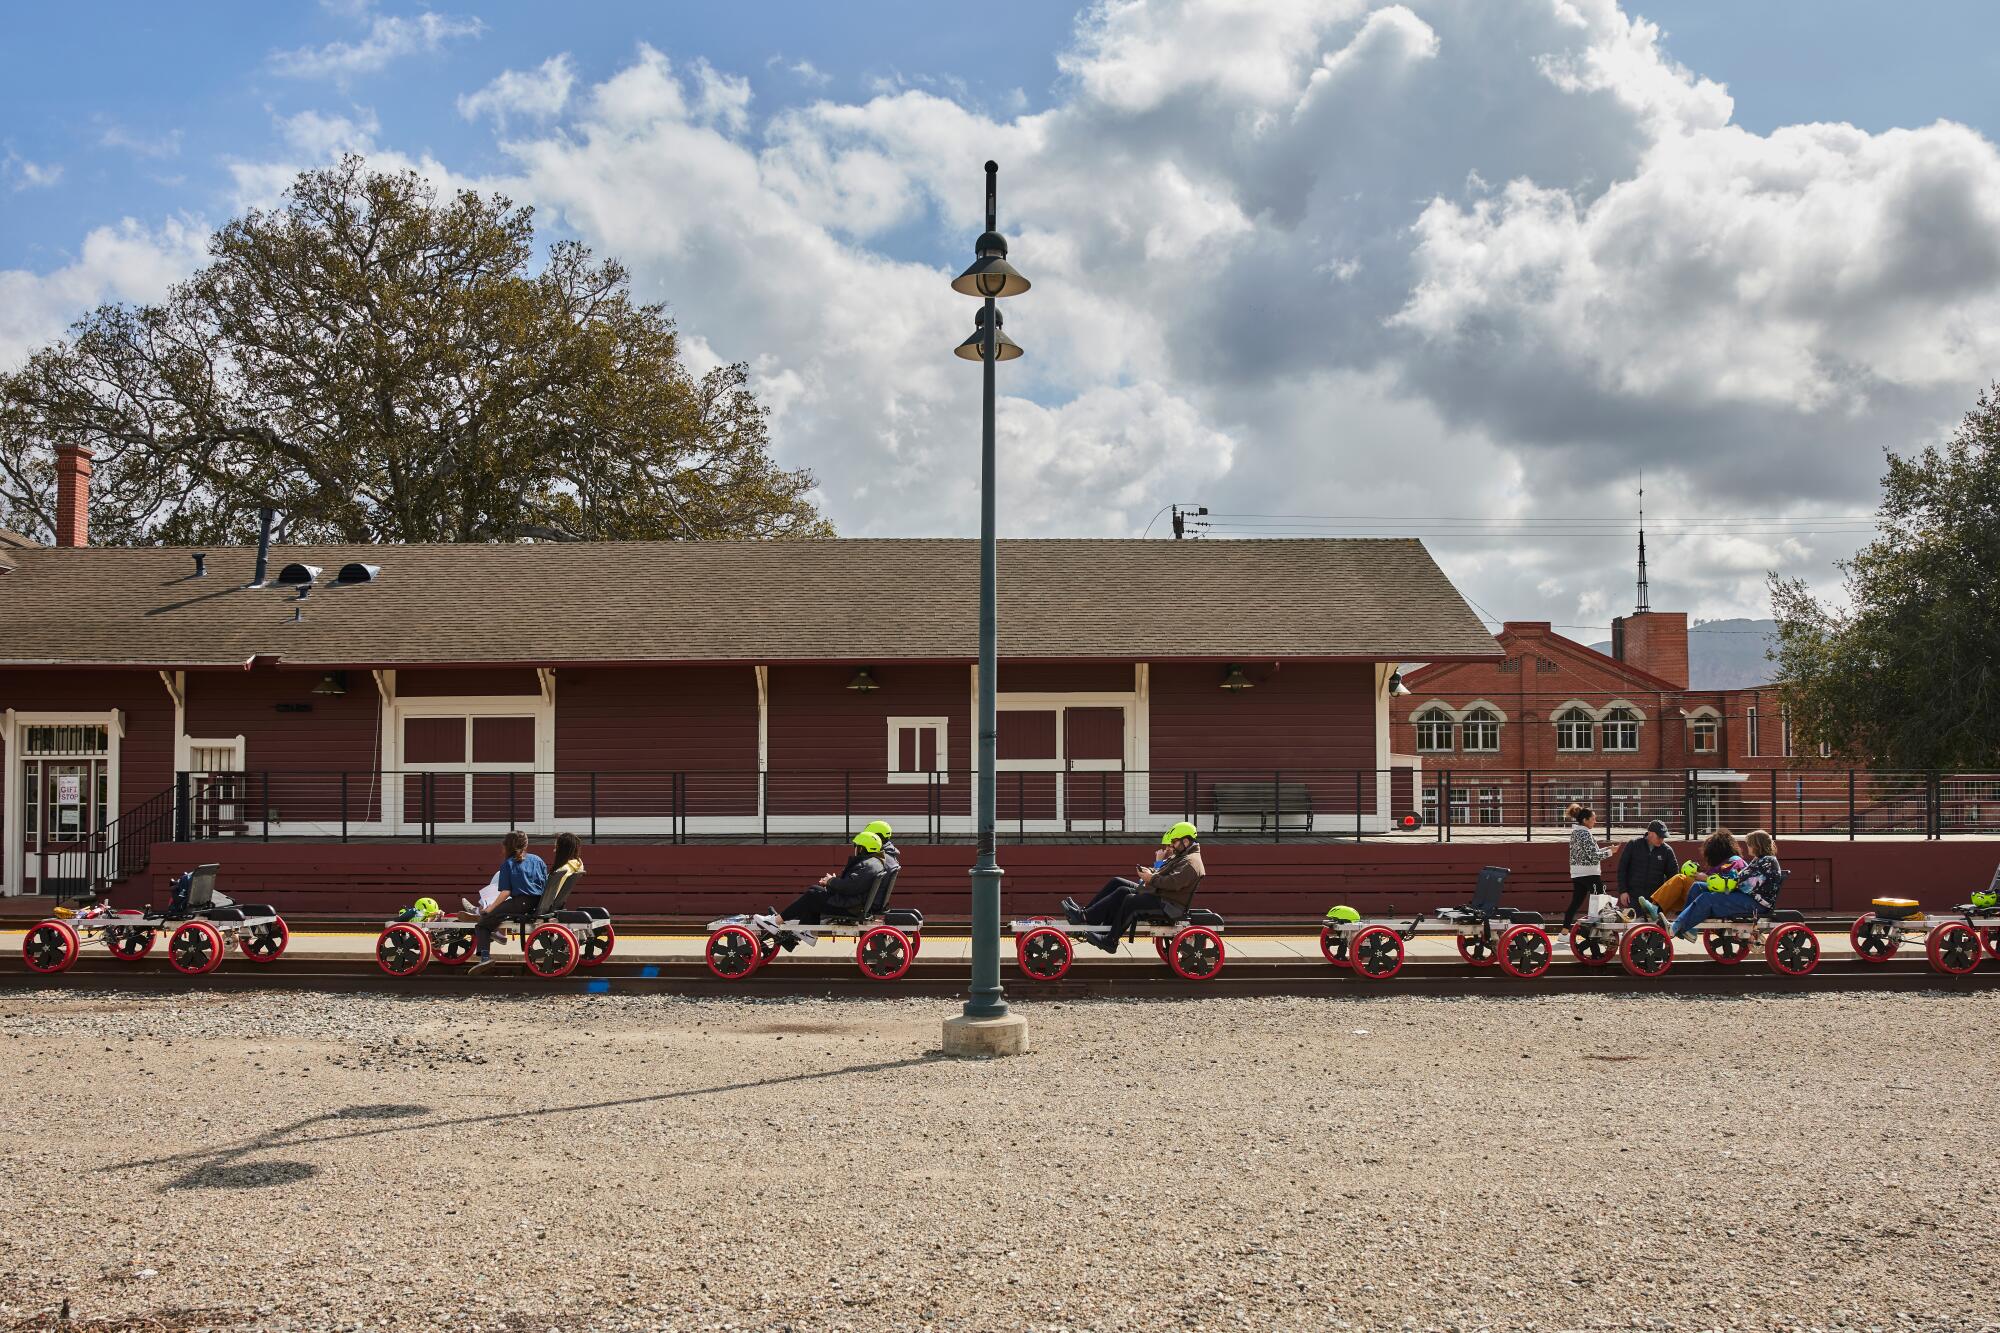 A scene-setting photo of a red building, with a set of train tracks in front of it holding seven railbikes, some with riders.